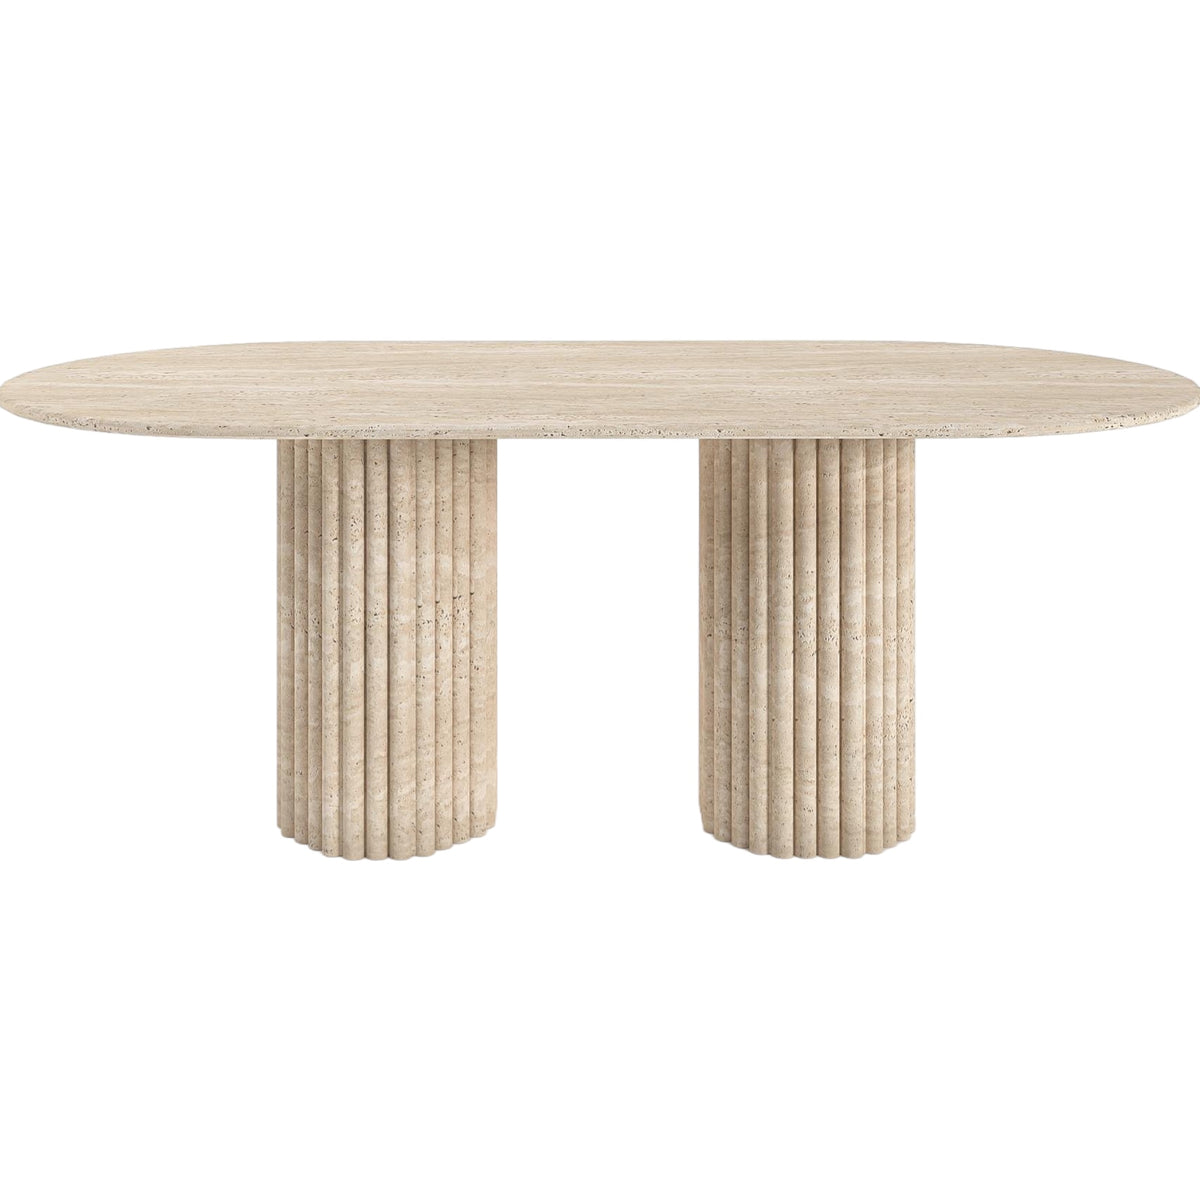 LORENZO HAND CRAFTED ORGANIC OVAL TRAVERTINE DINING TABLE